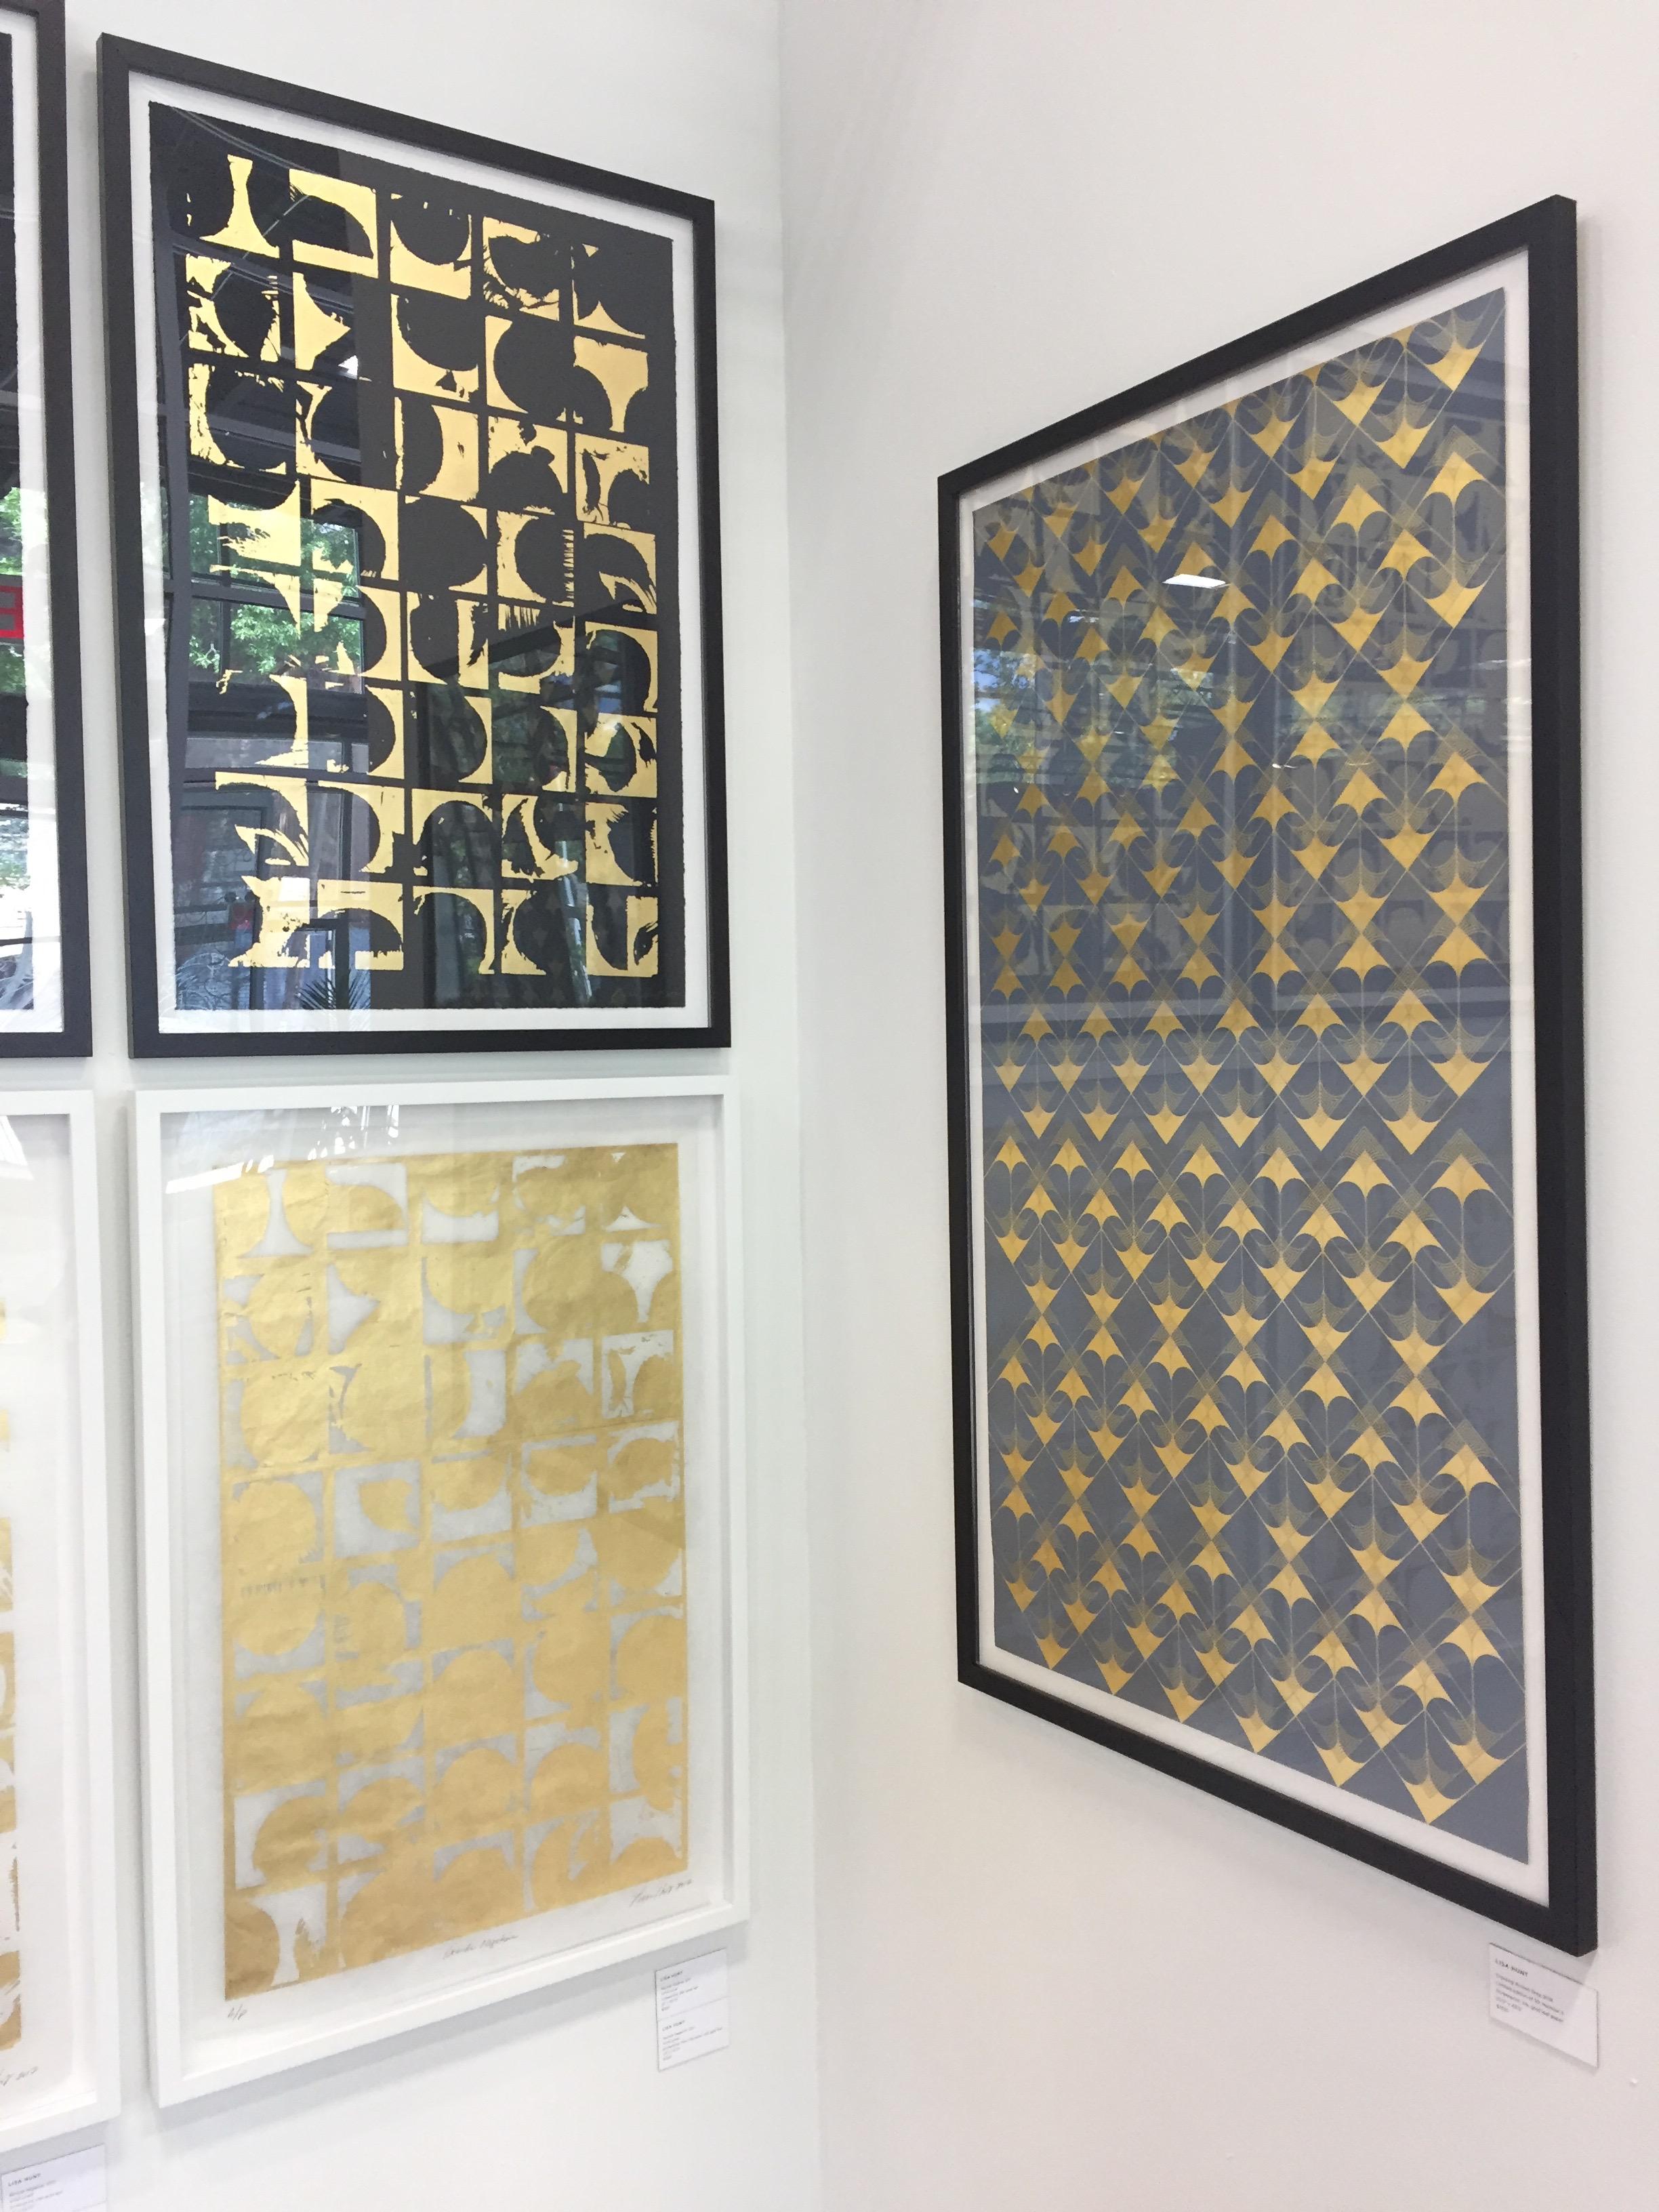 Lisa Hunt’s Crossing Arrows Grey is an abstract screen printed work on gold leaf paper with black and metallic gold ink. The overlapping open and ruled arrows are graphic and form a symmetrical repeat pattern. The print is trimmed with the image